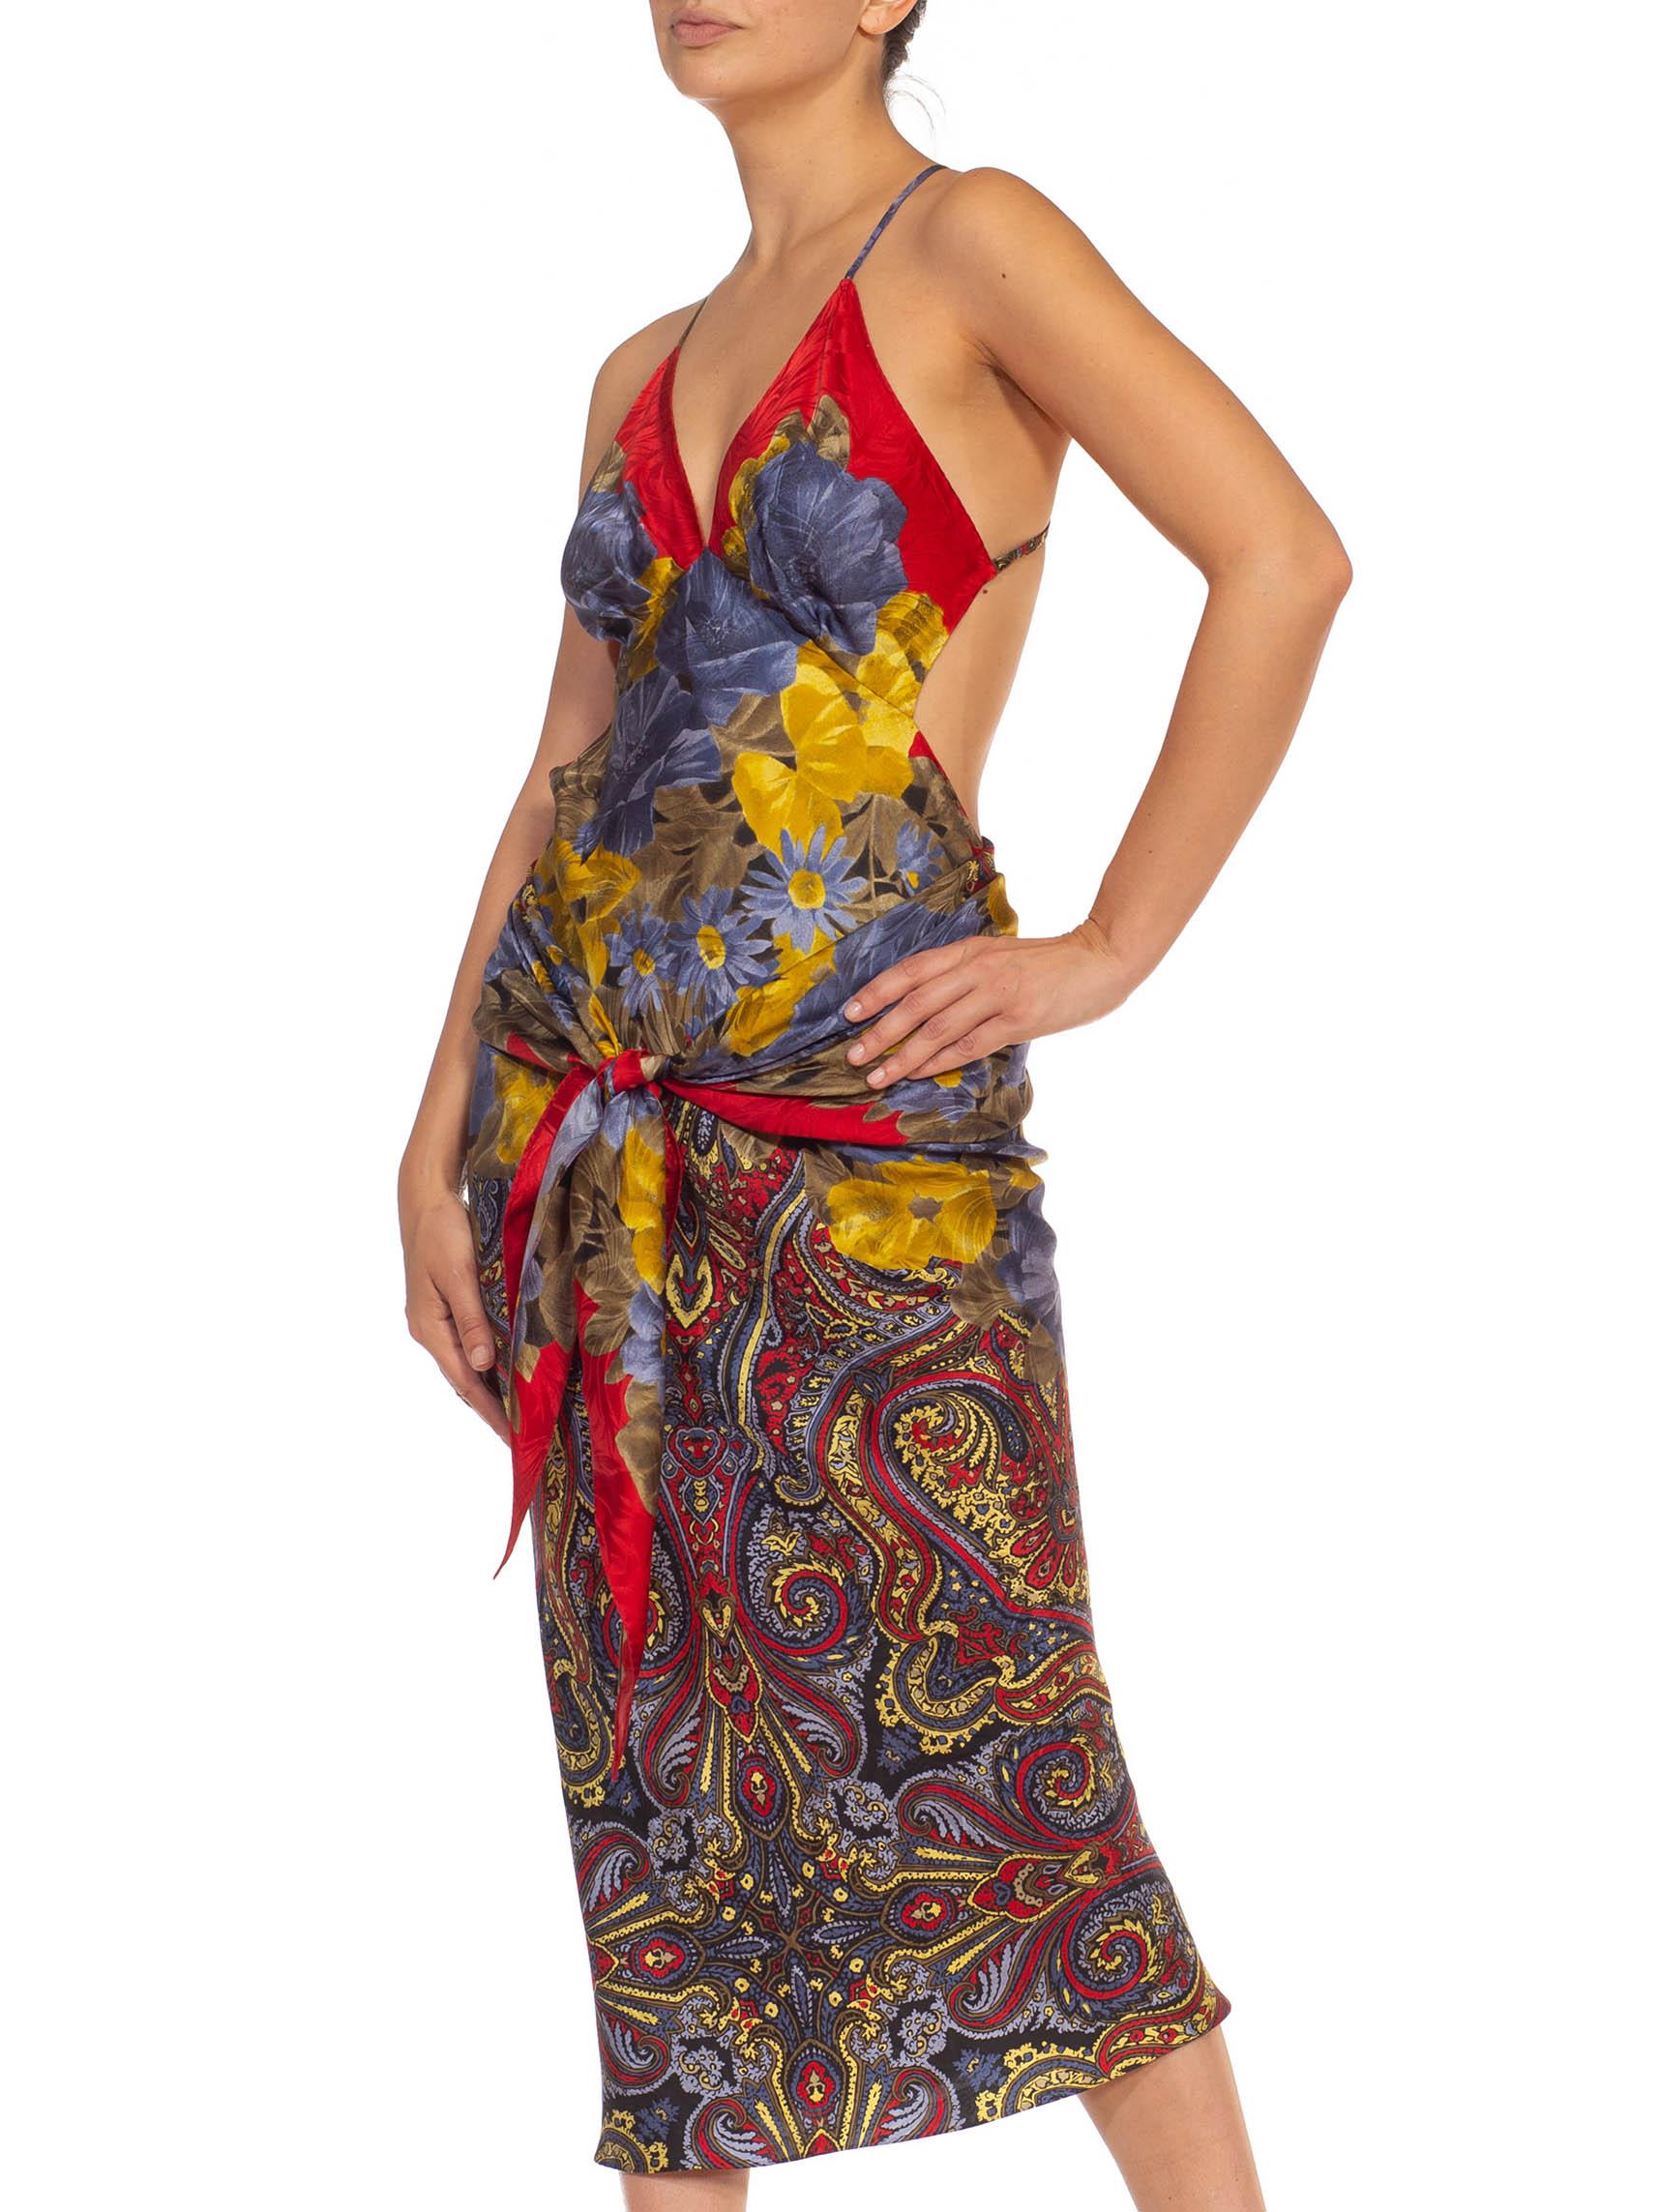 Women's MORPHEW COLLECTION Red Blue & Yellow Silk Sagittarius Dress Made From Vintage Sc